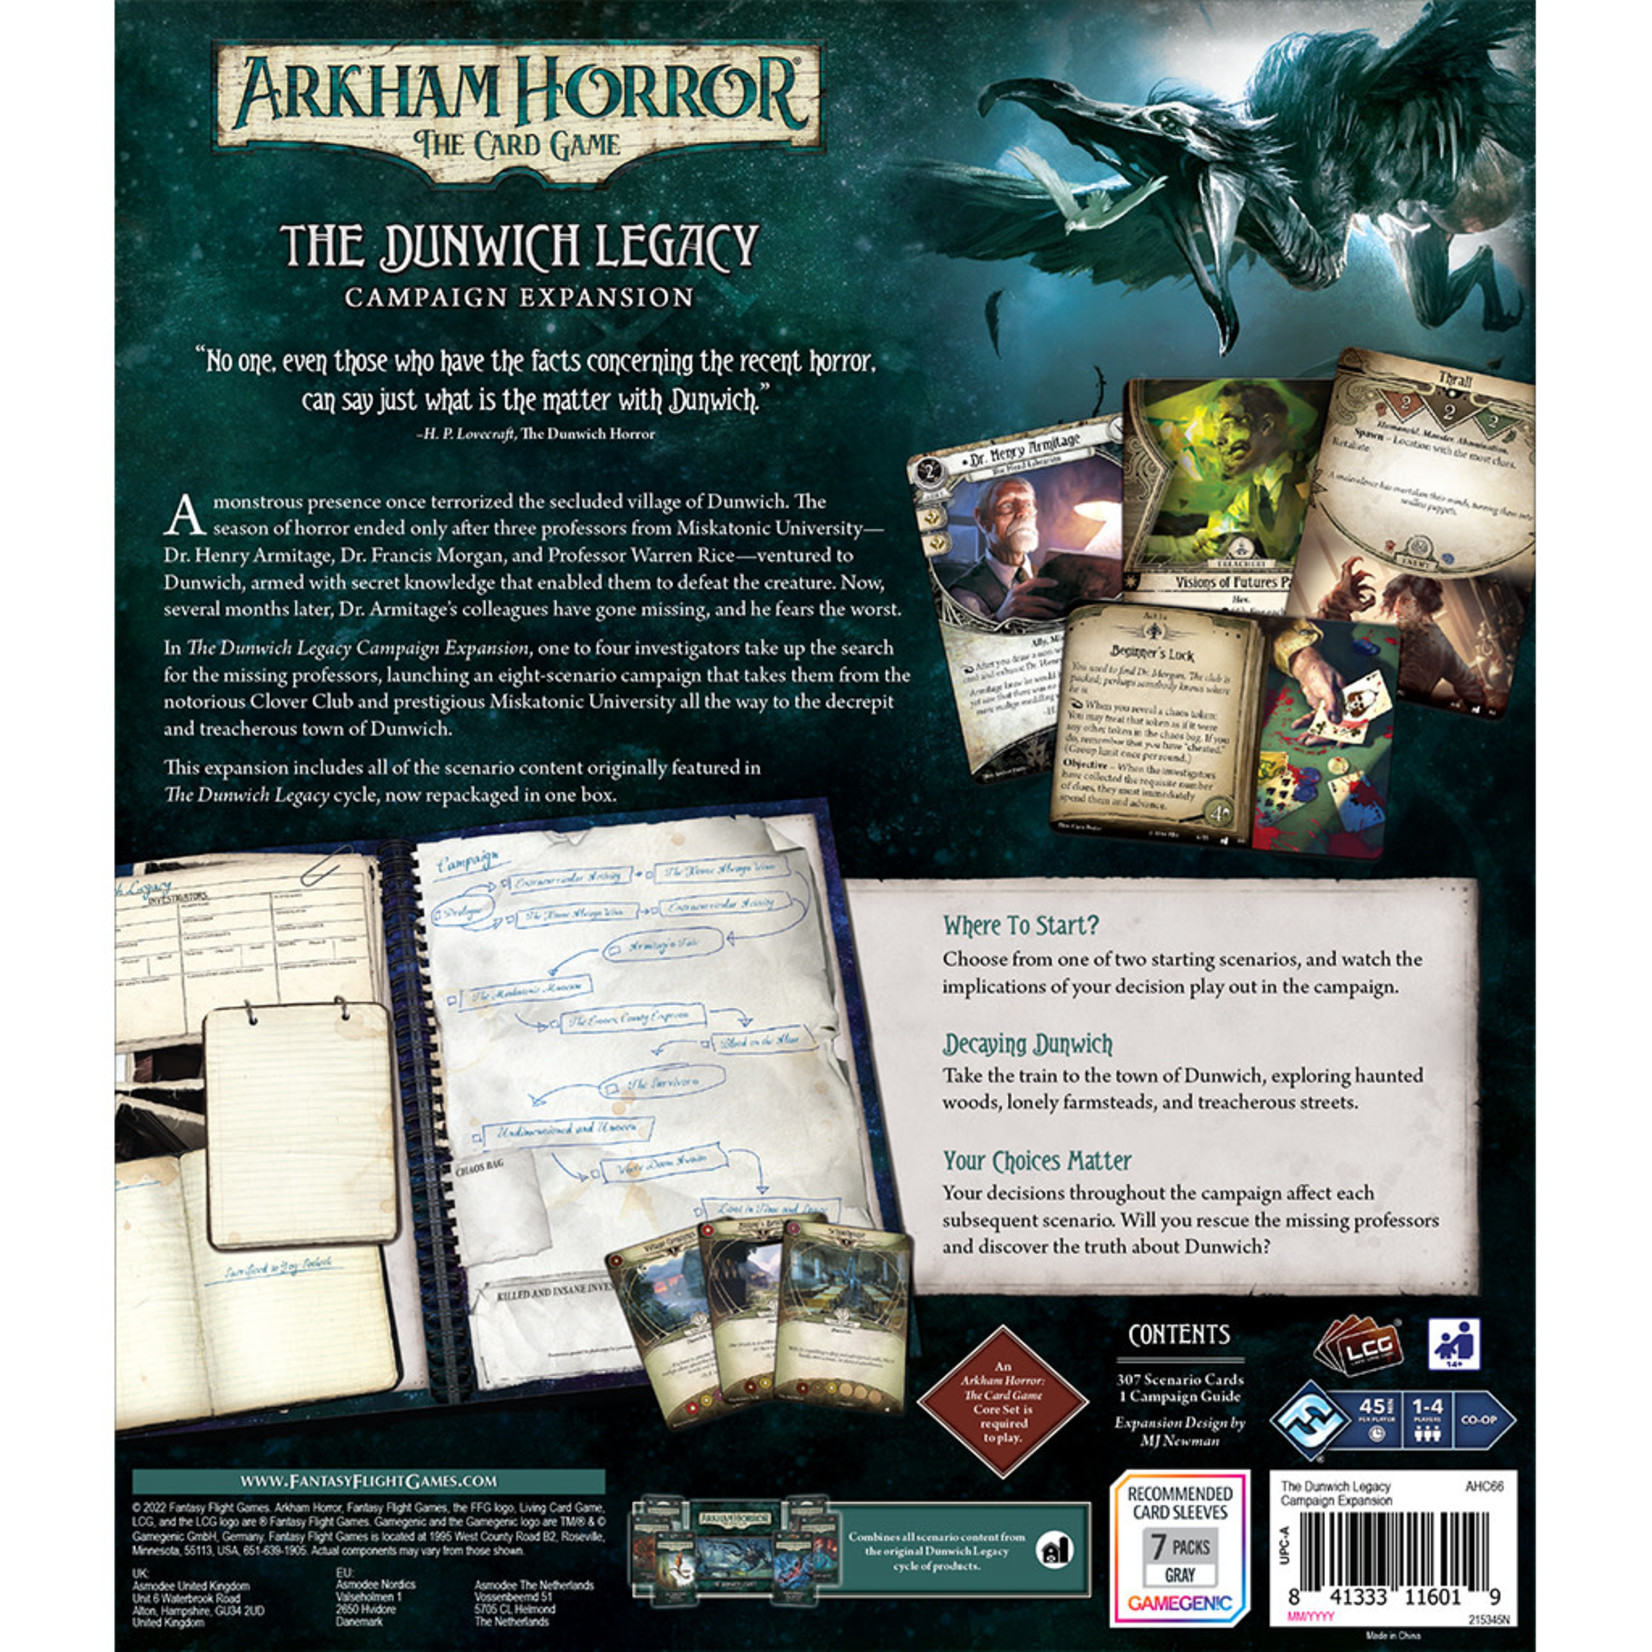 Fantasy Flight Games Arkham Horror The Card Game: The Dunwich Legacy Campaign Expansion